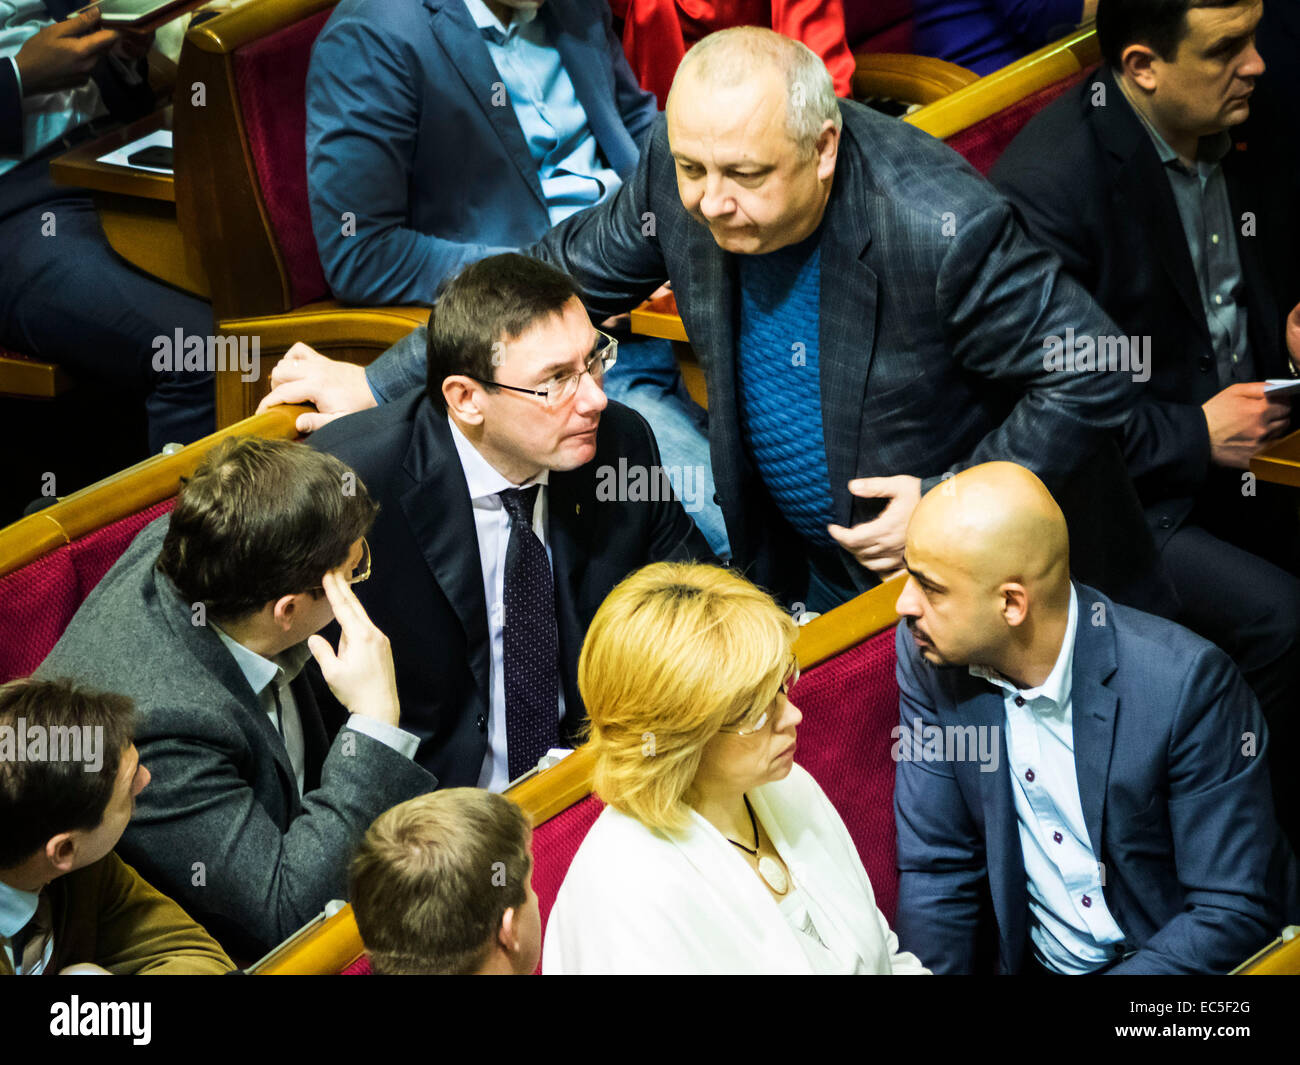 Kiev, Ukraine. 9th December, 2014. The head of the Bloc Poroshenko in Parliament Yuriy Lutsenko speaks with deputy journalist Mustafa Naem  --  Oleg Lyashko faction blocked the rostrum demanding an immediate vote a resolution on dismissal of the Chairmanship of the Committee of former members of the Party of Regions, which voted in favor of dictatorial laws of January 16. Oleg Lyashko spoke from the podium: 'It is the law of January 16 led to bloodshed on the Maidan, and for this reason, these members are not eligible to participate in nation-build Credit:  Igor Golovnov/Alamy Live News Stock Photo